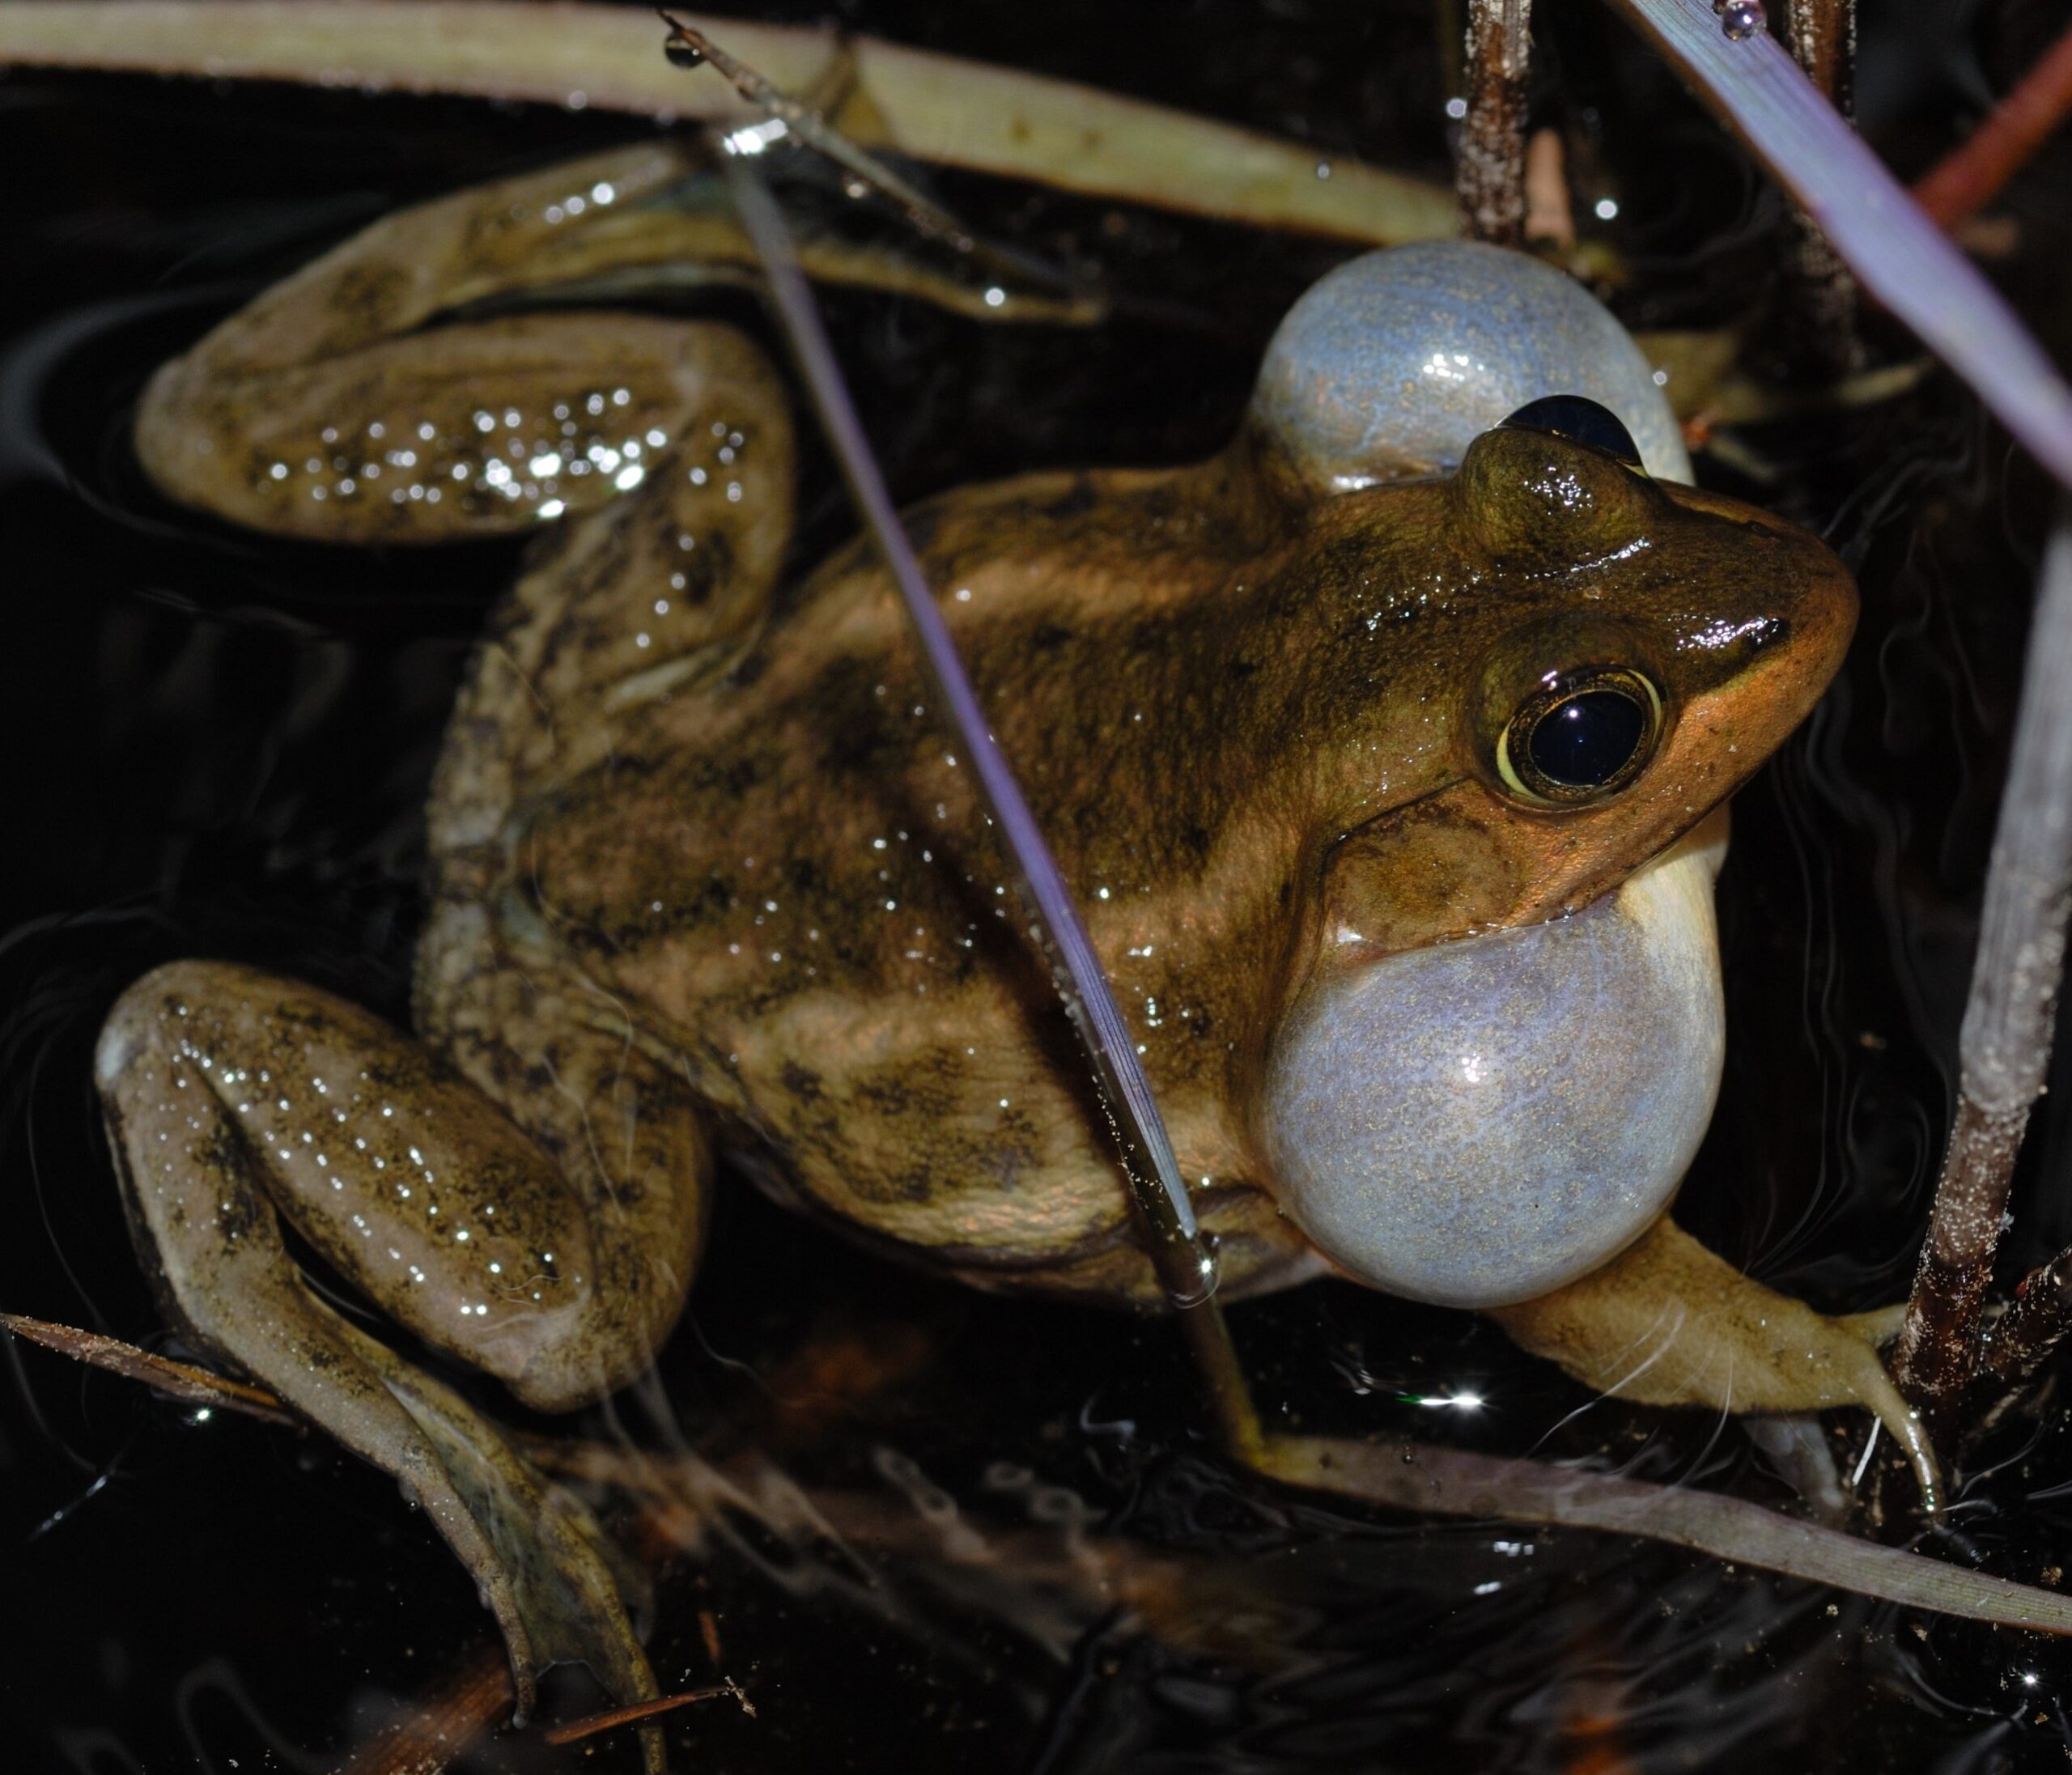 FROGS AND TOADS HAVE SPECIAL TRAITS